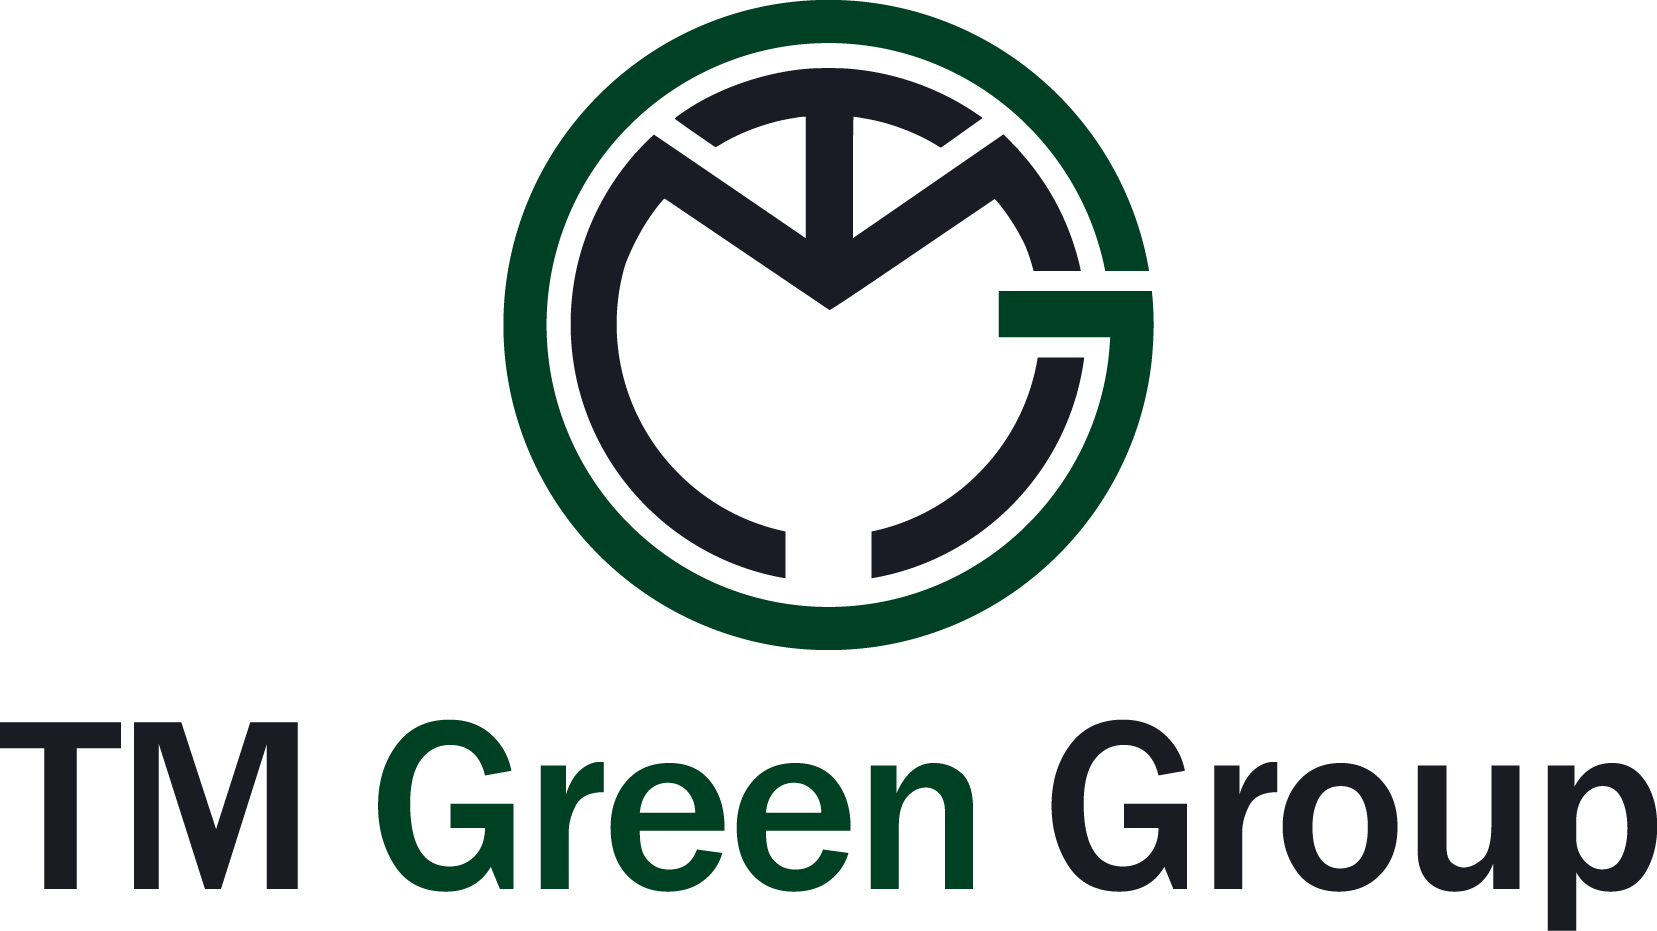 TM Green Group – Recruitment, Training and Marketing